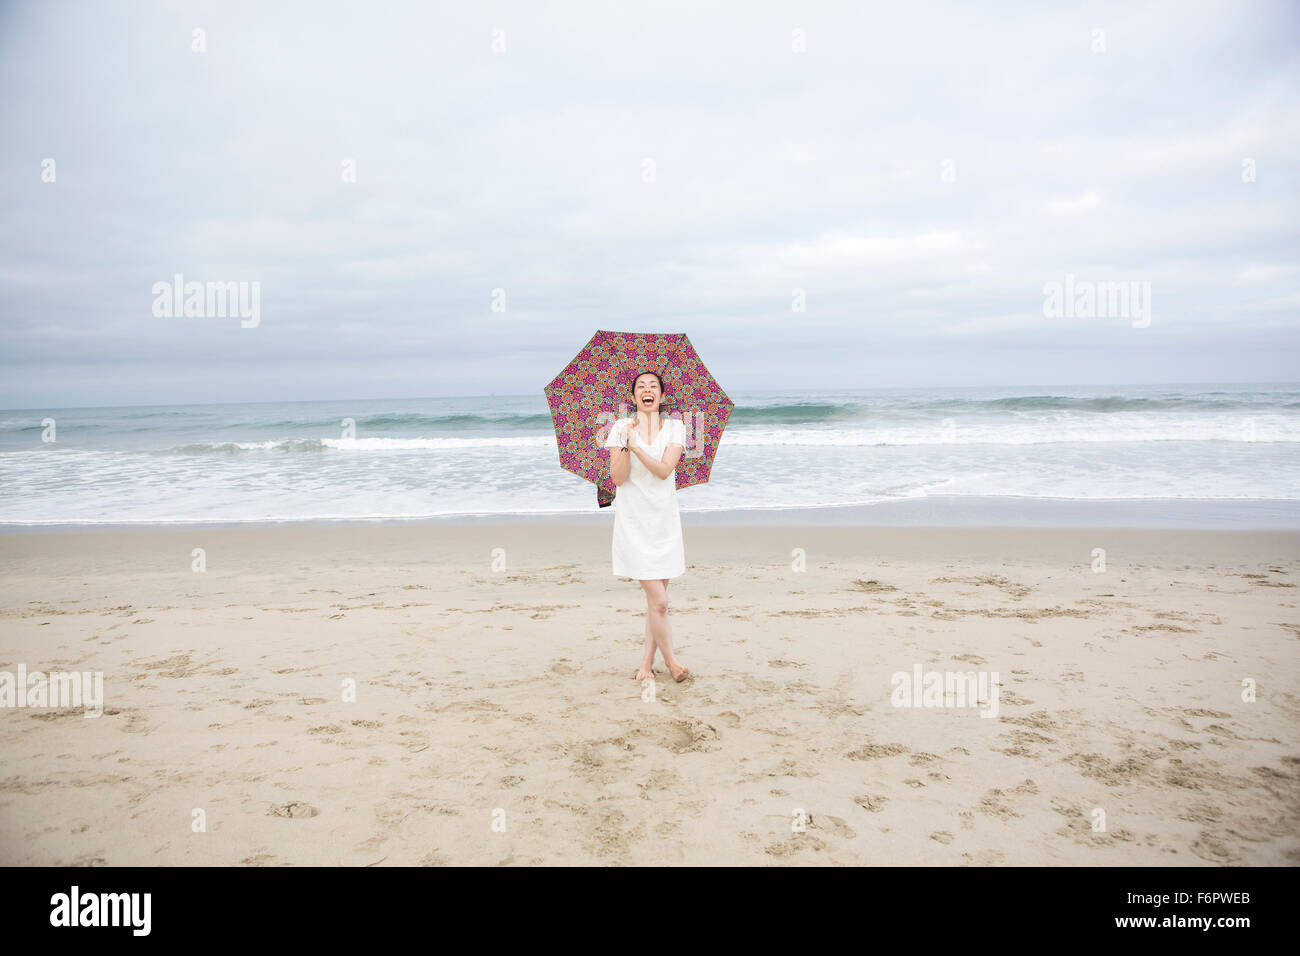 Woman laughing with umbrella on beach Stock Photo